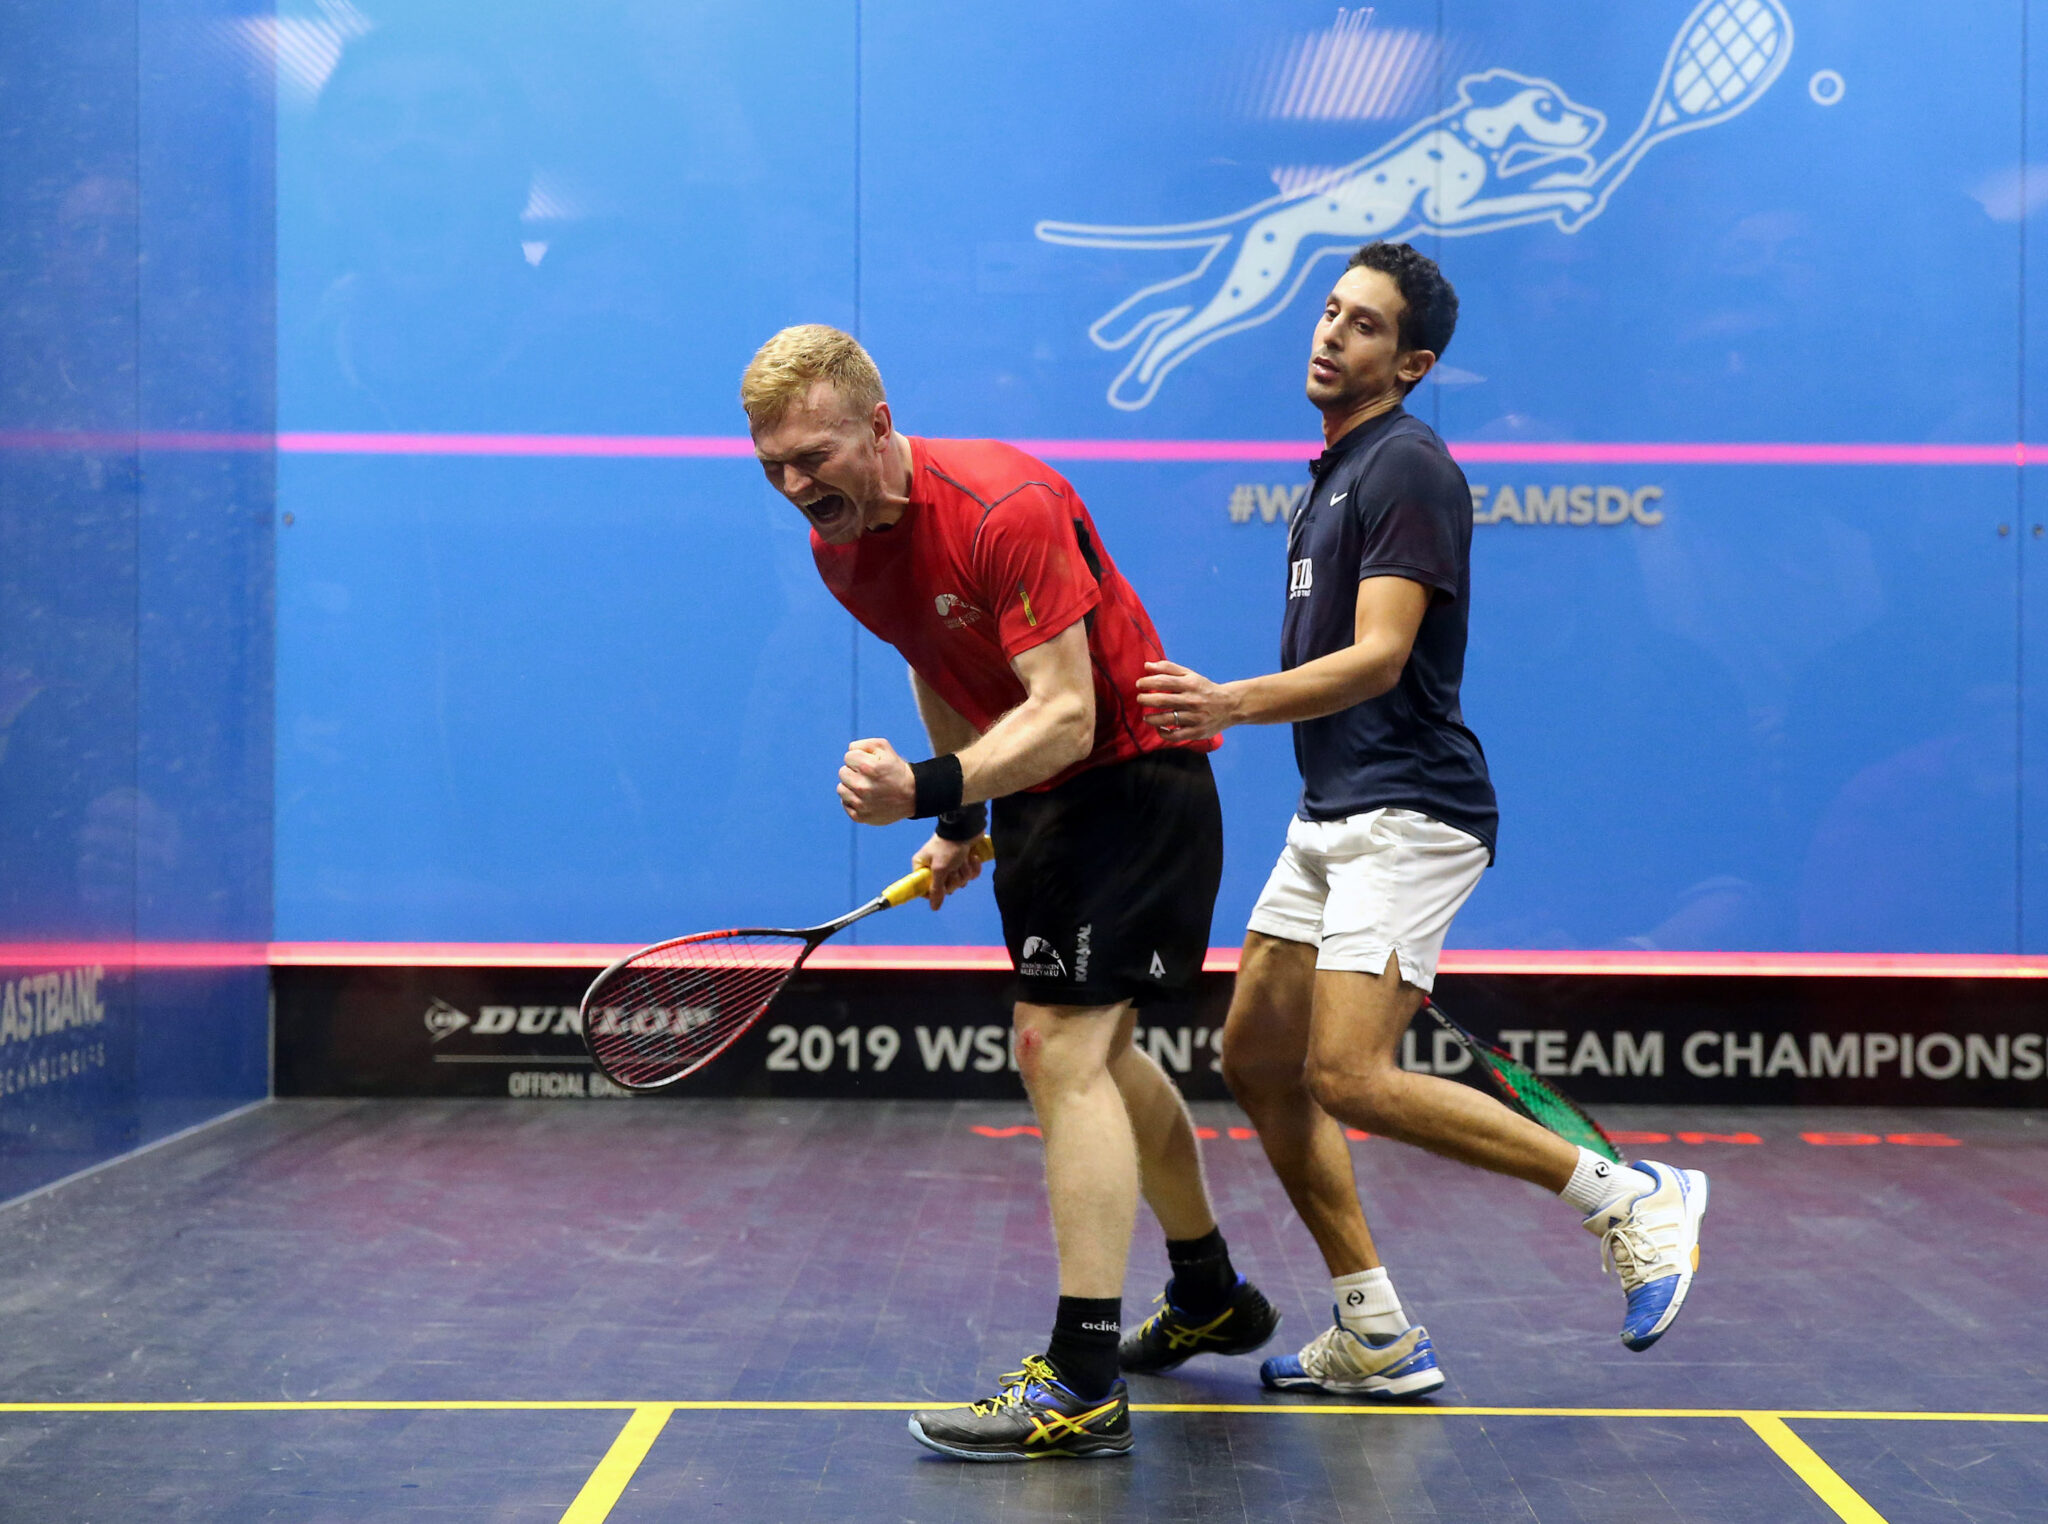 Squash On Fire, Wales On Fire, Joel On Fire At World Team Squash Championships In Washington DC